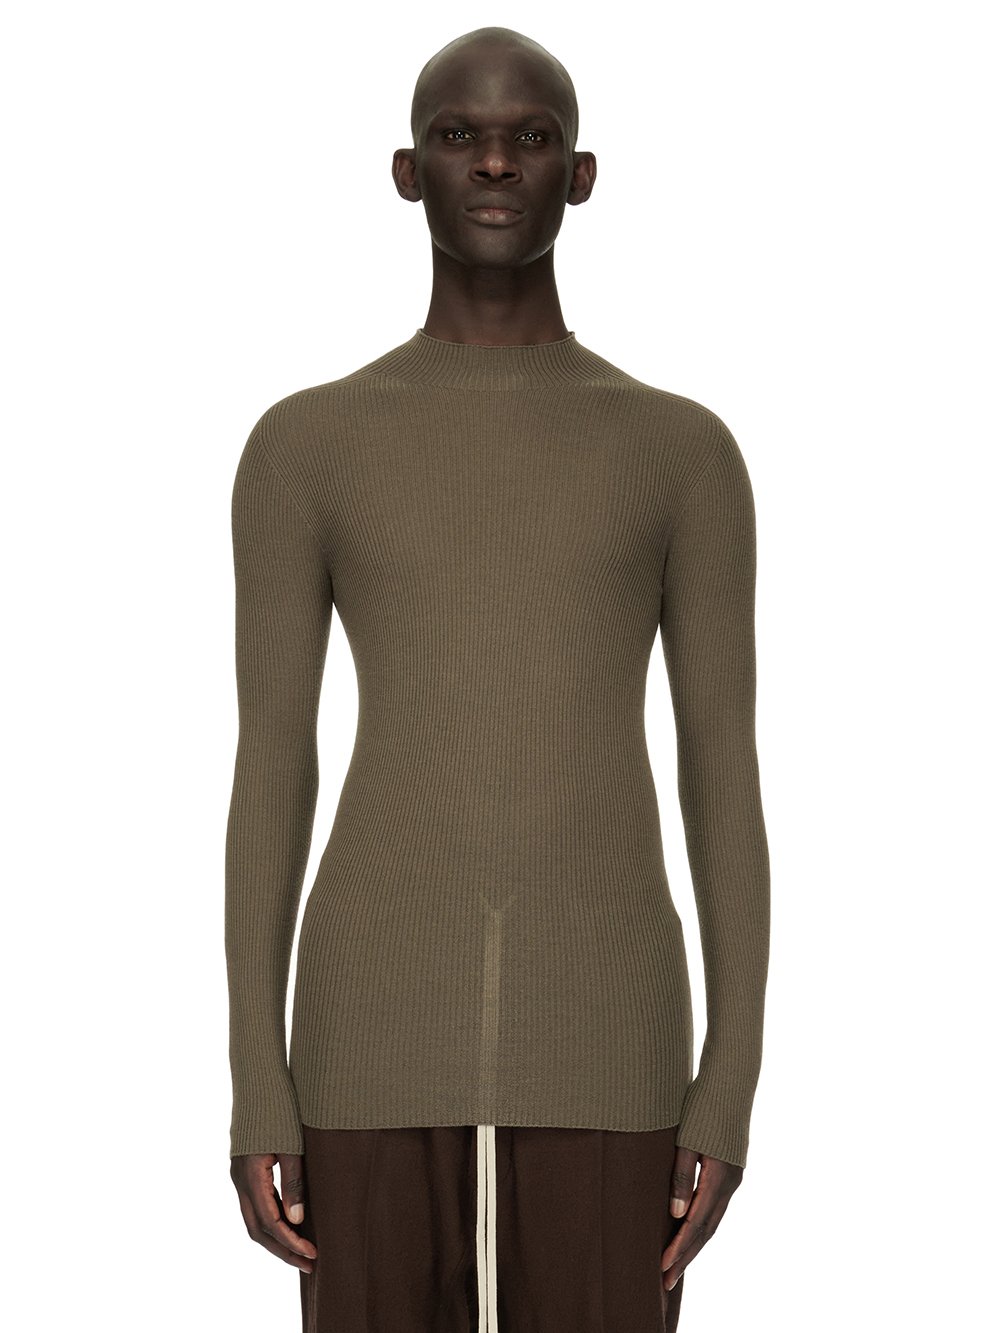 RICK OWENS FW23 LUXOR RIBBED LUPETTO IN DUST GREY LIGHTWEIGHT RIBBED KNIT